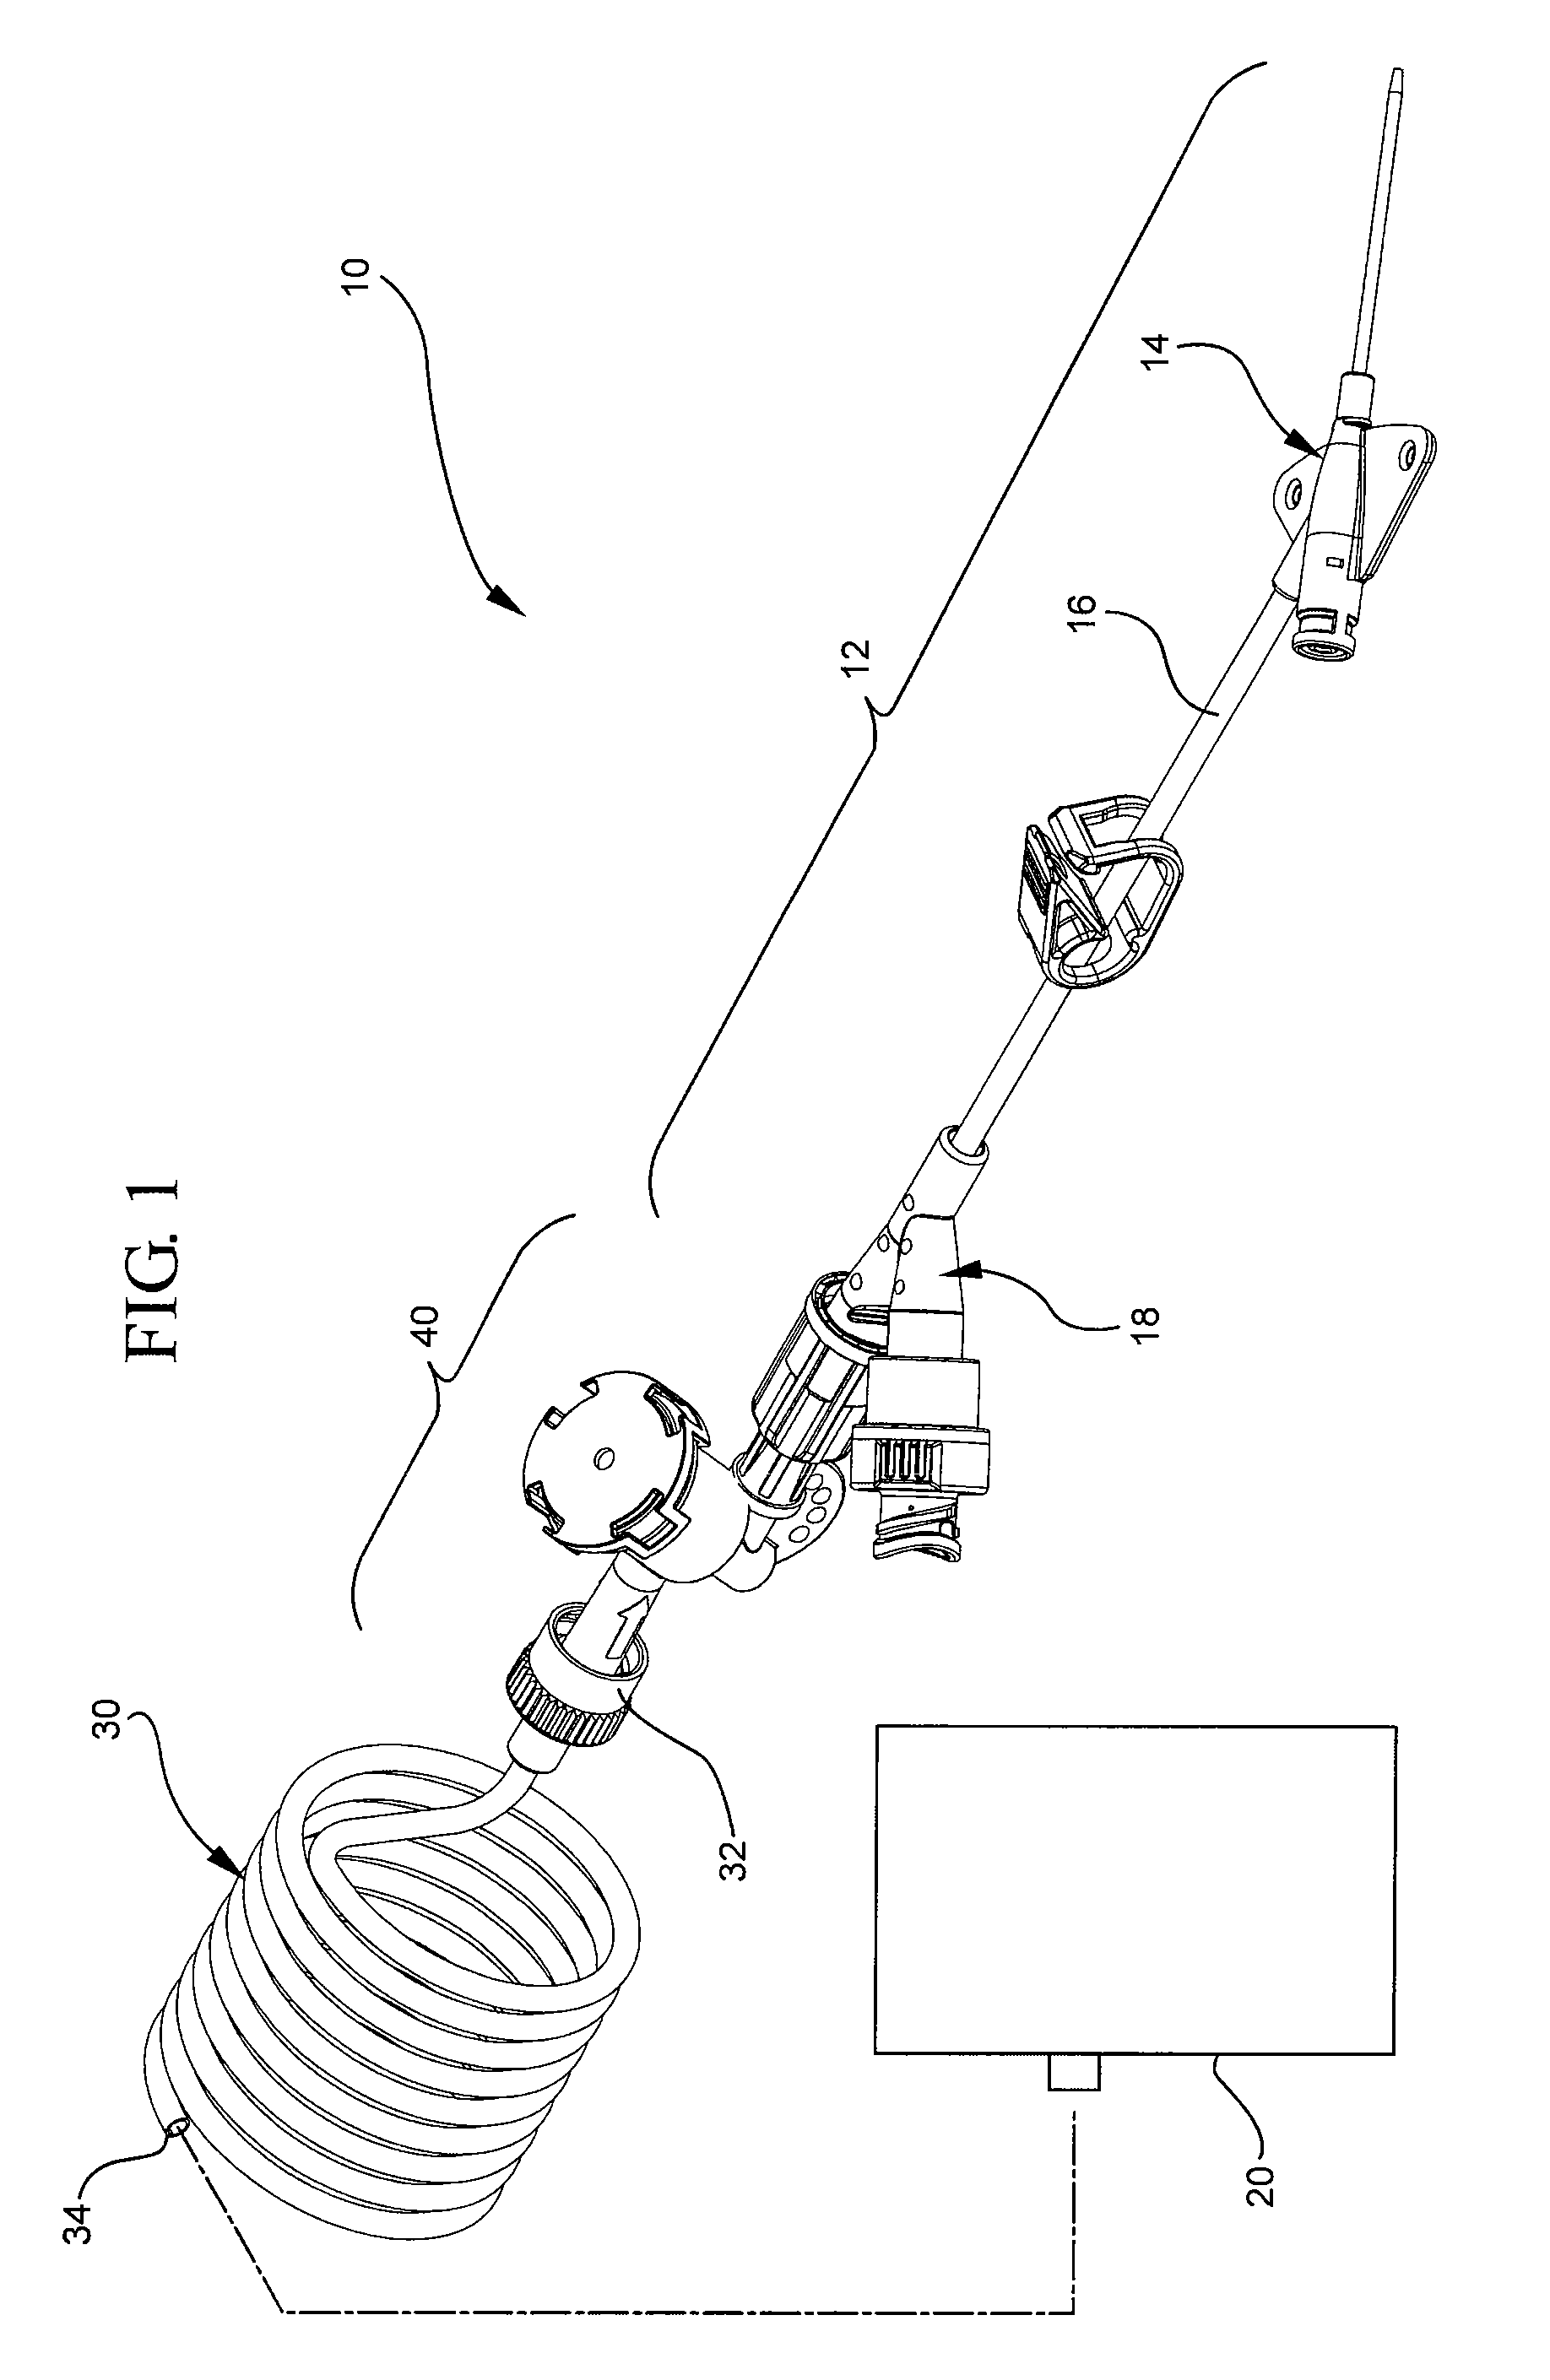 Systems and methods for providing an automatic occulsion device